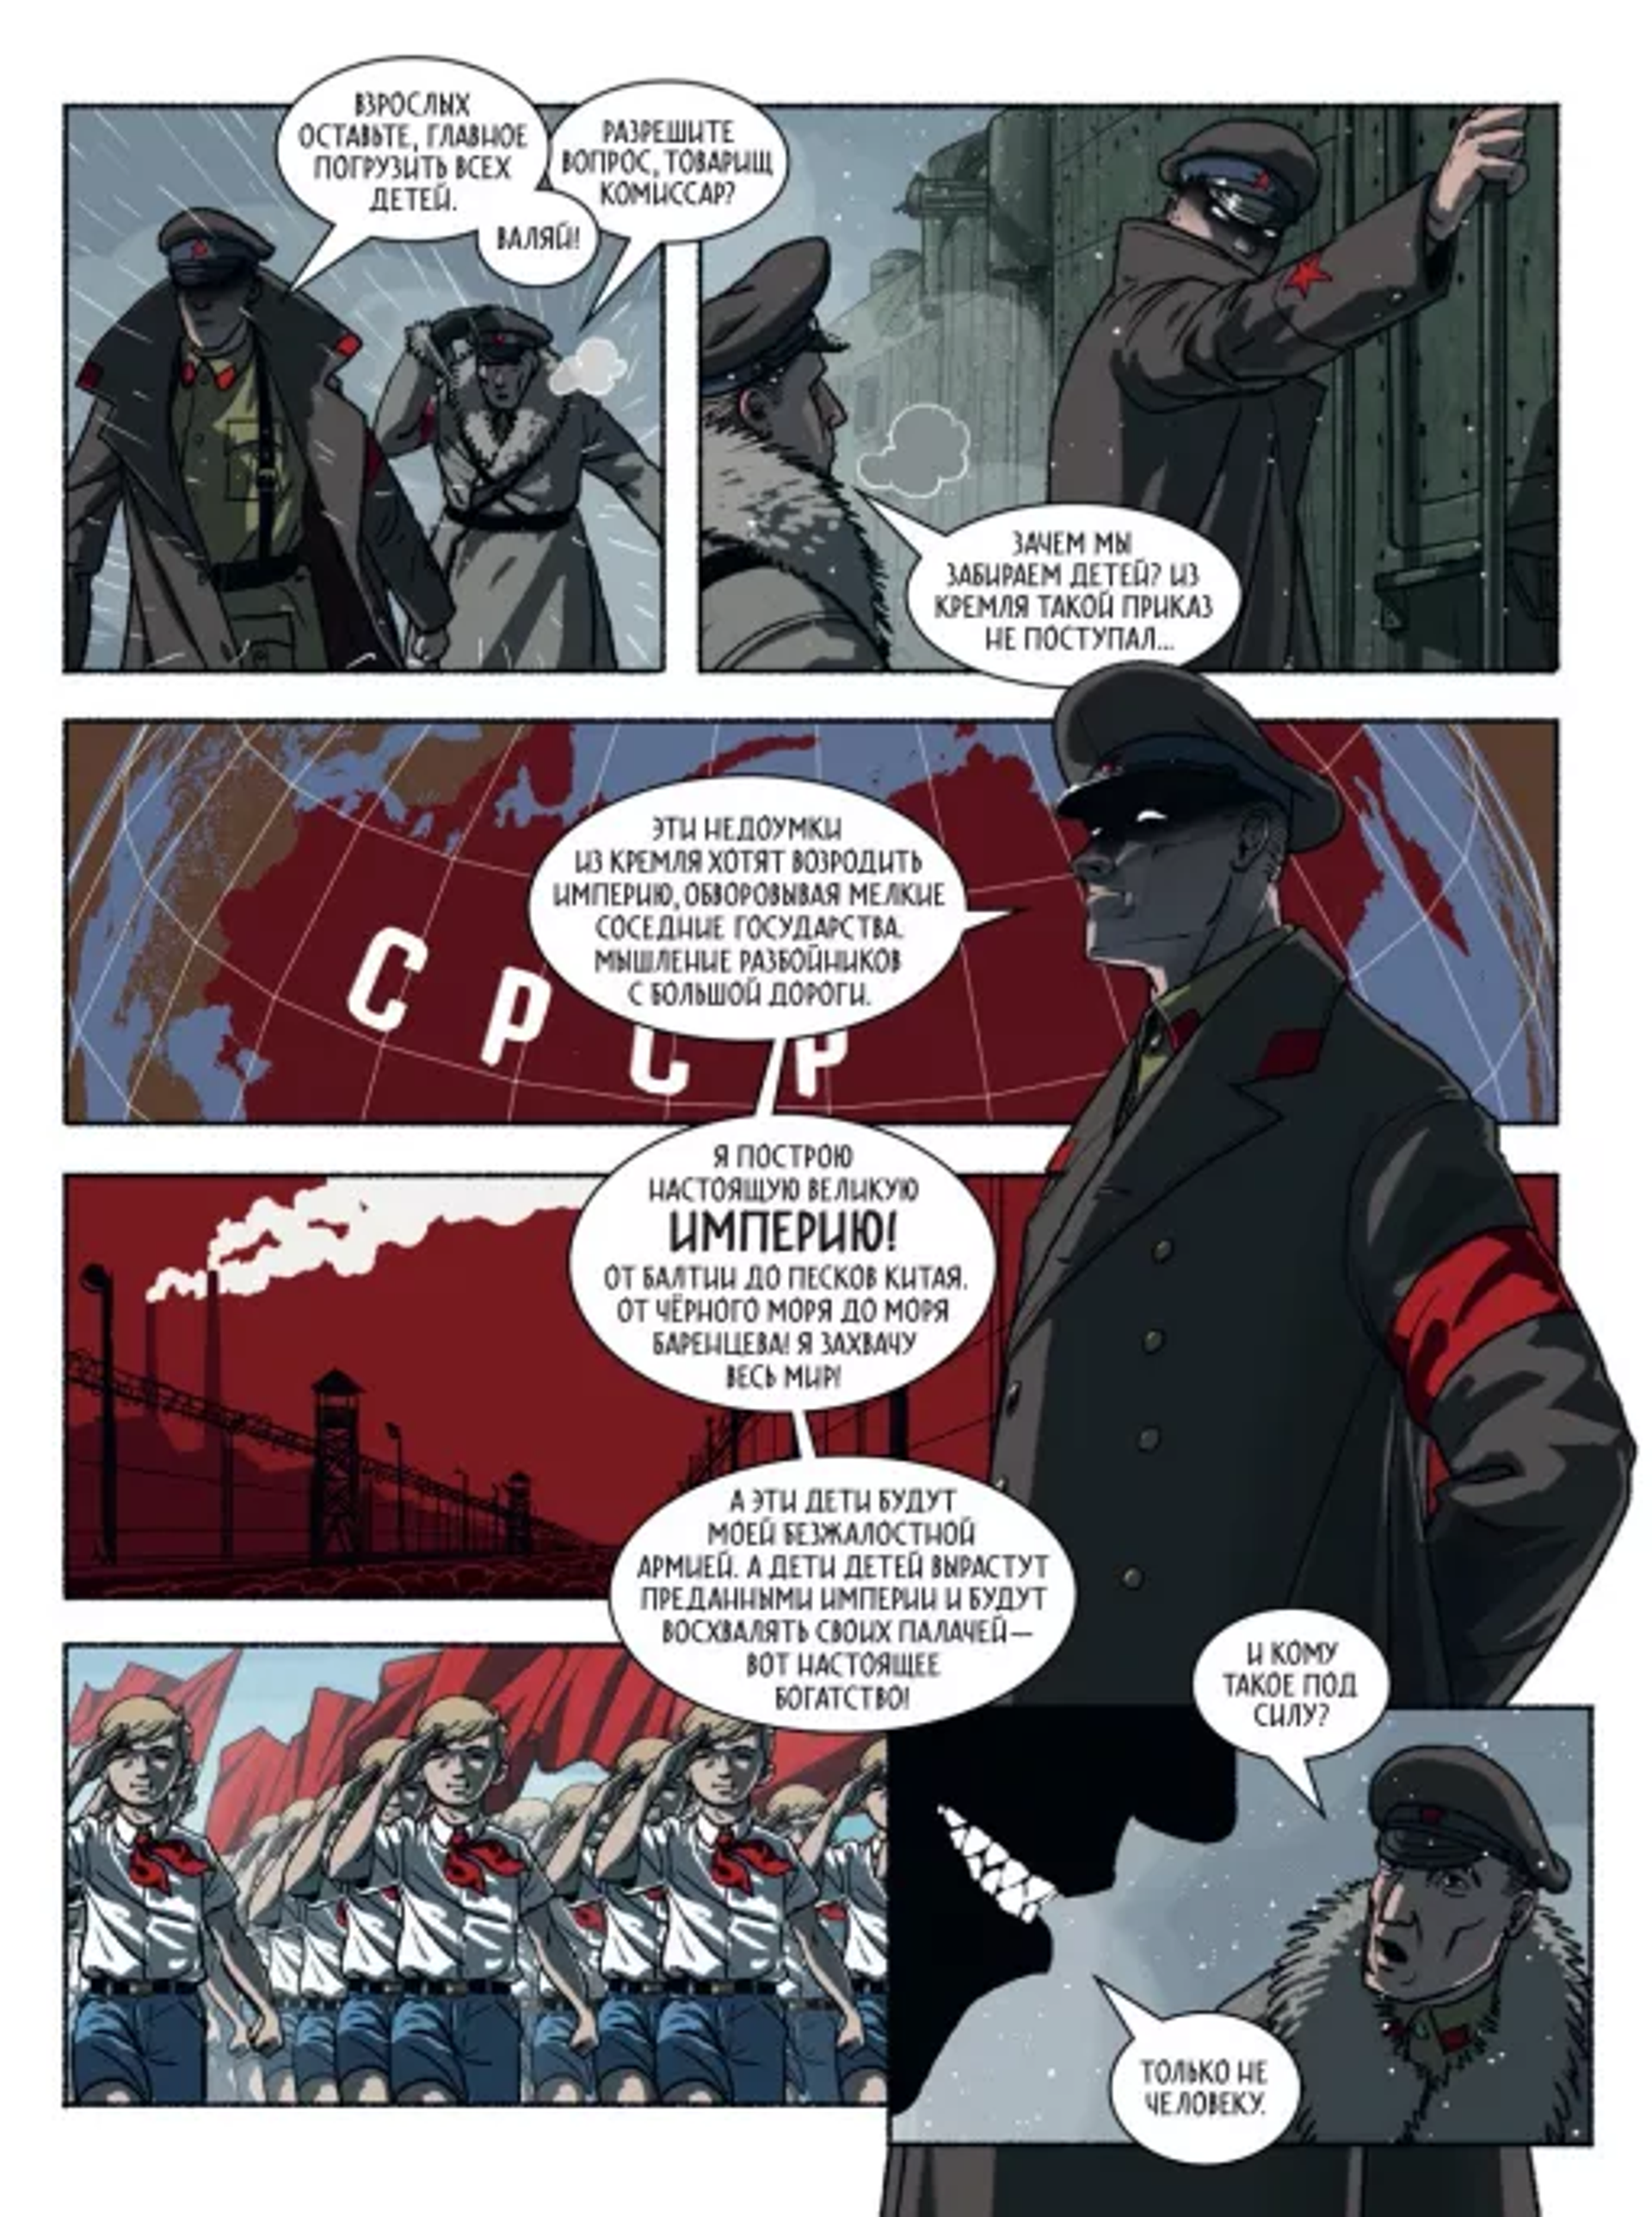 Page from the comic ‘Confrontation: Red Terror’. - Sputnik International, 1920, 10.04.2022